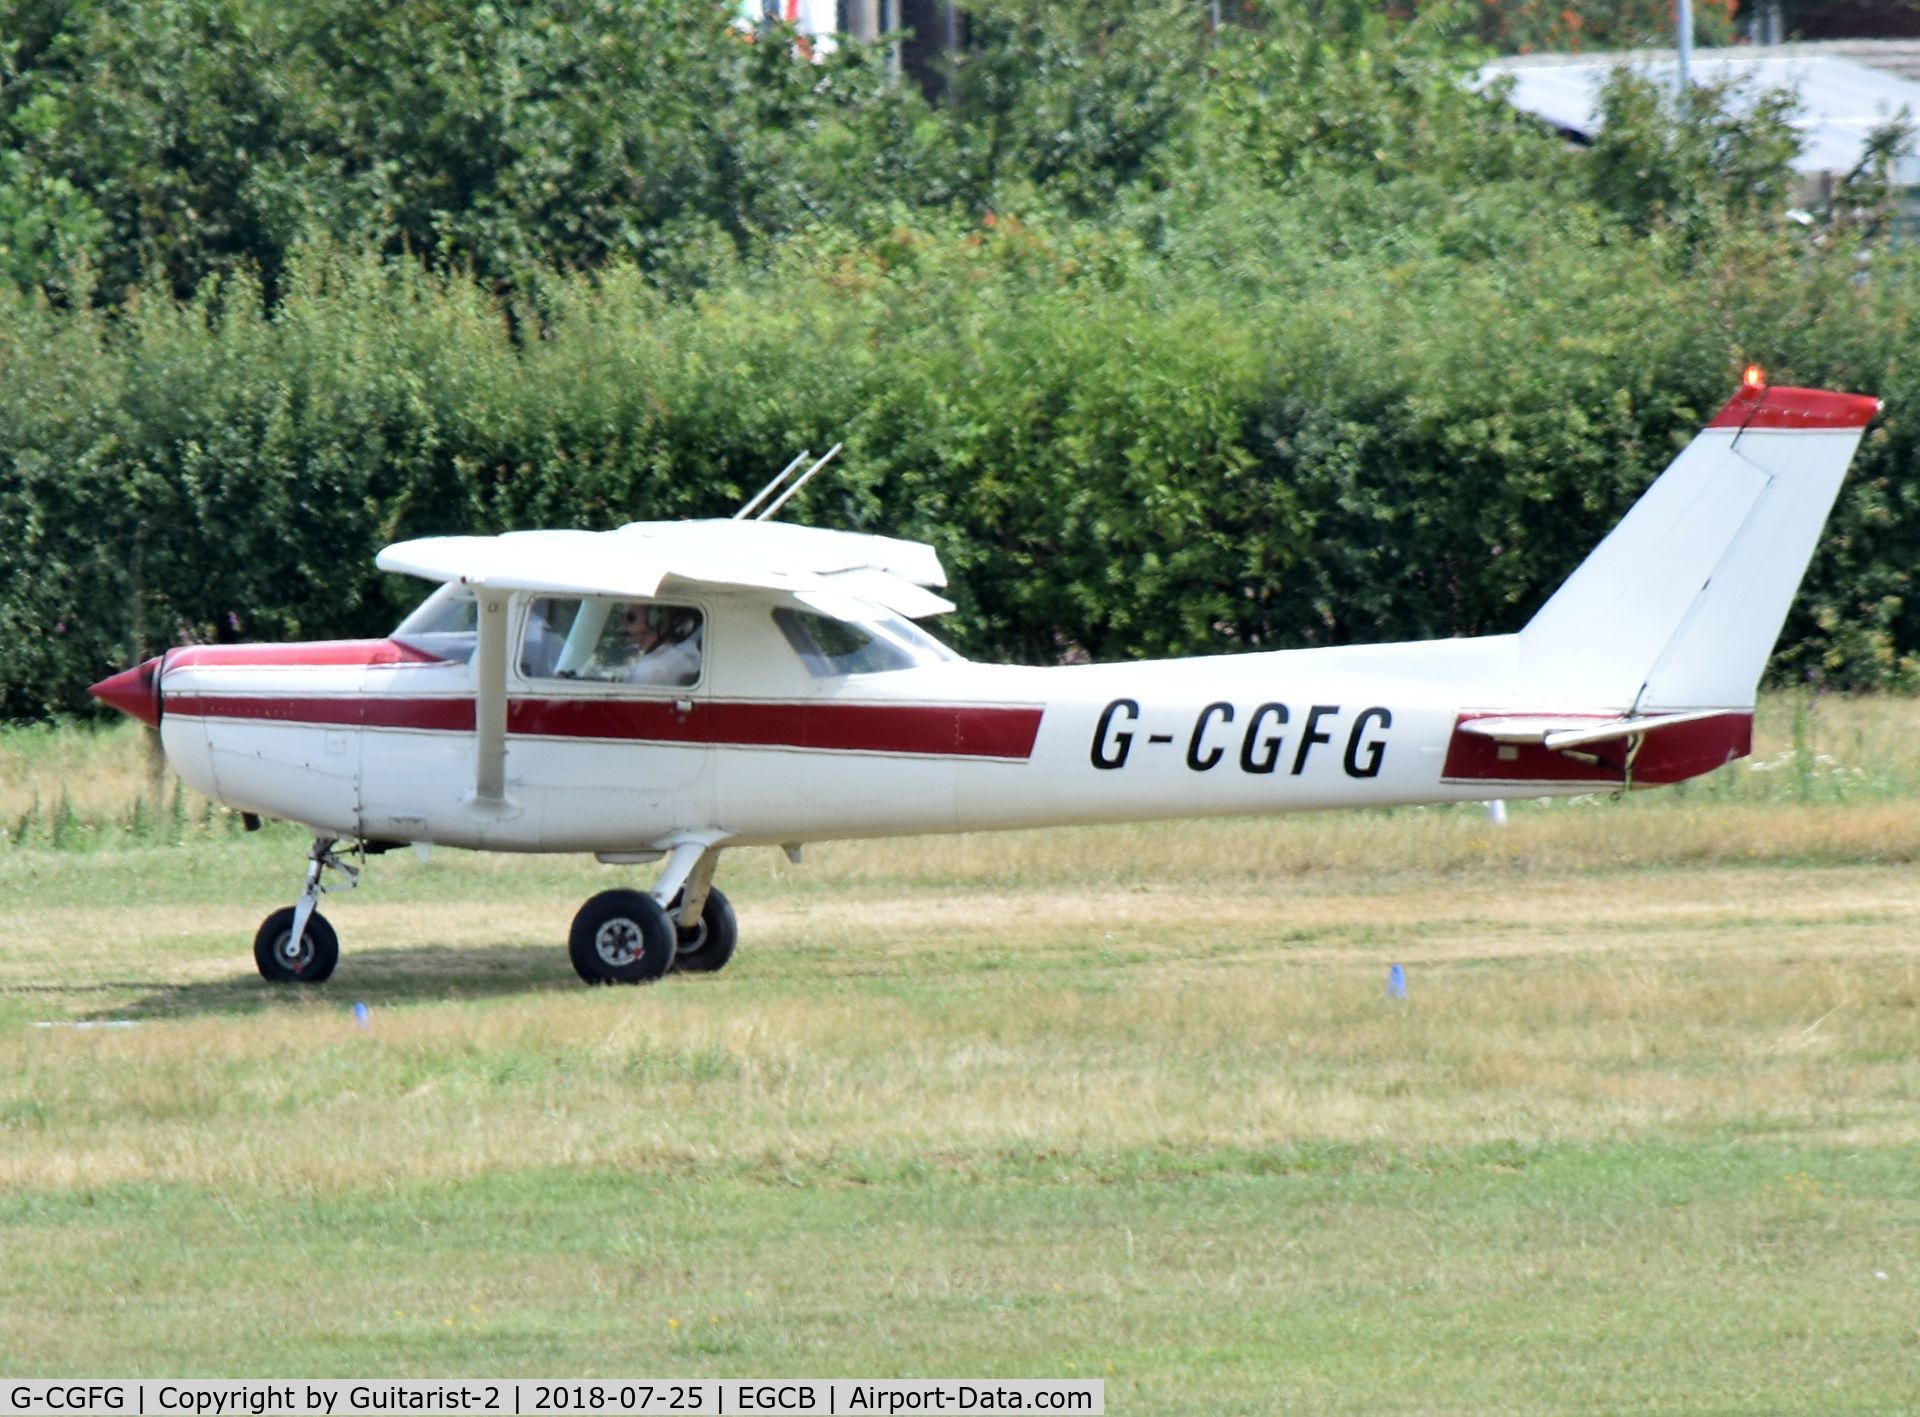 G-CGFG, 1983 Cessna 152 C/N 15285724, At City Airport Manchester